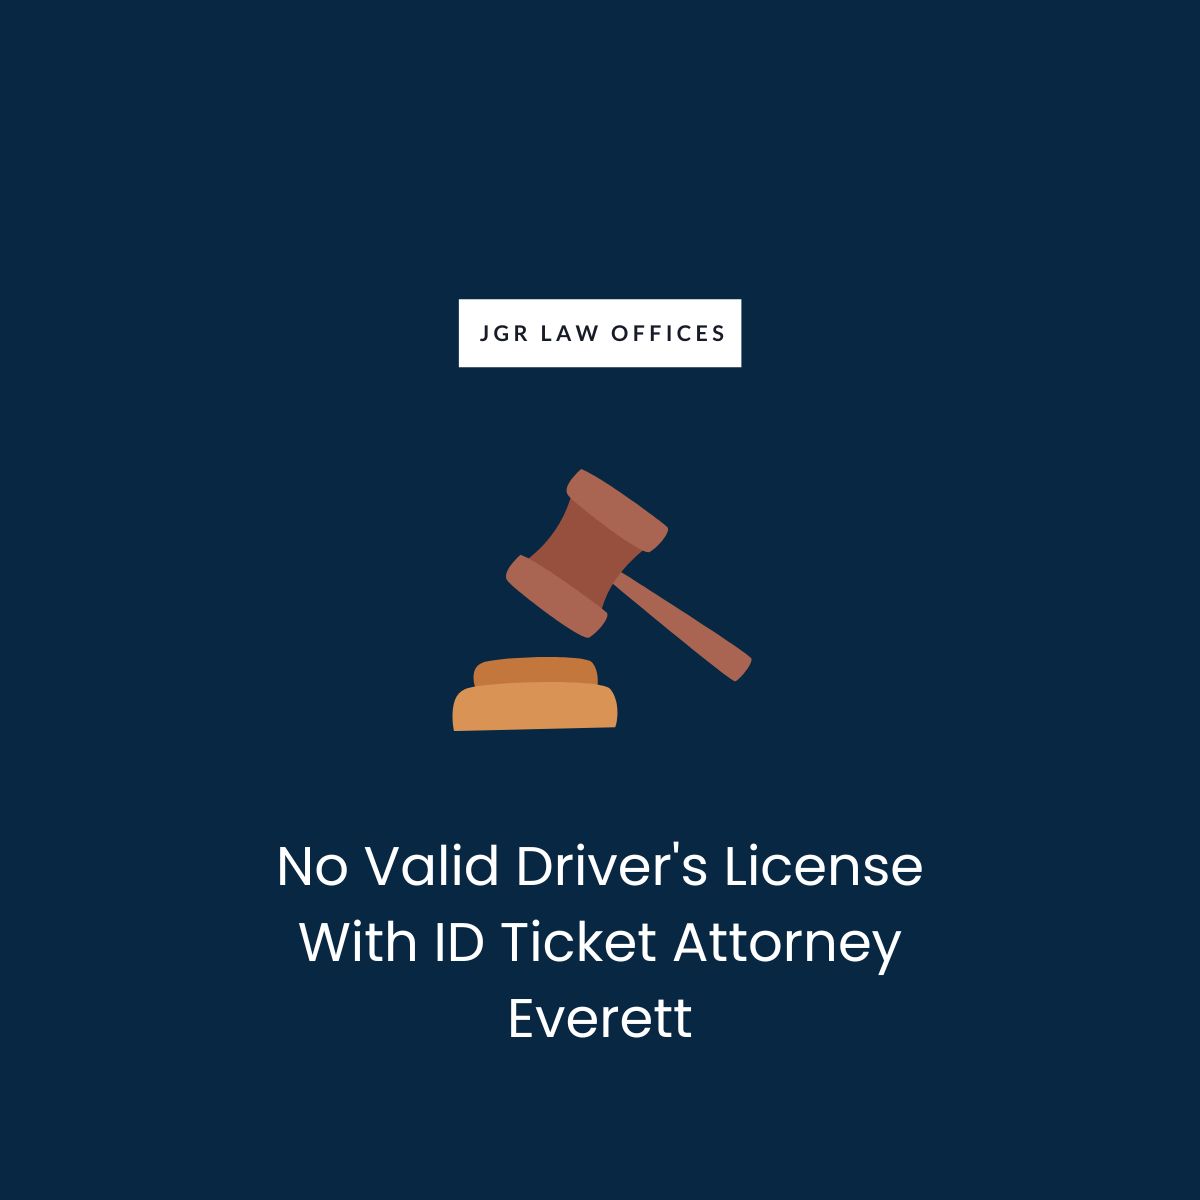 No Valid Driver's License With ID Ticket Attorney Everett